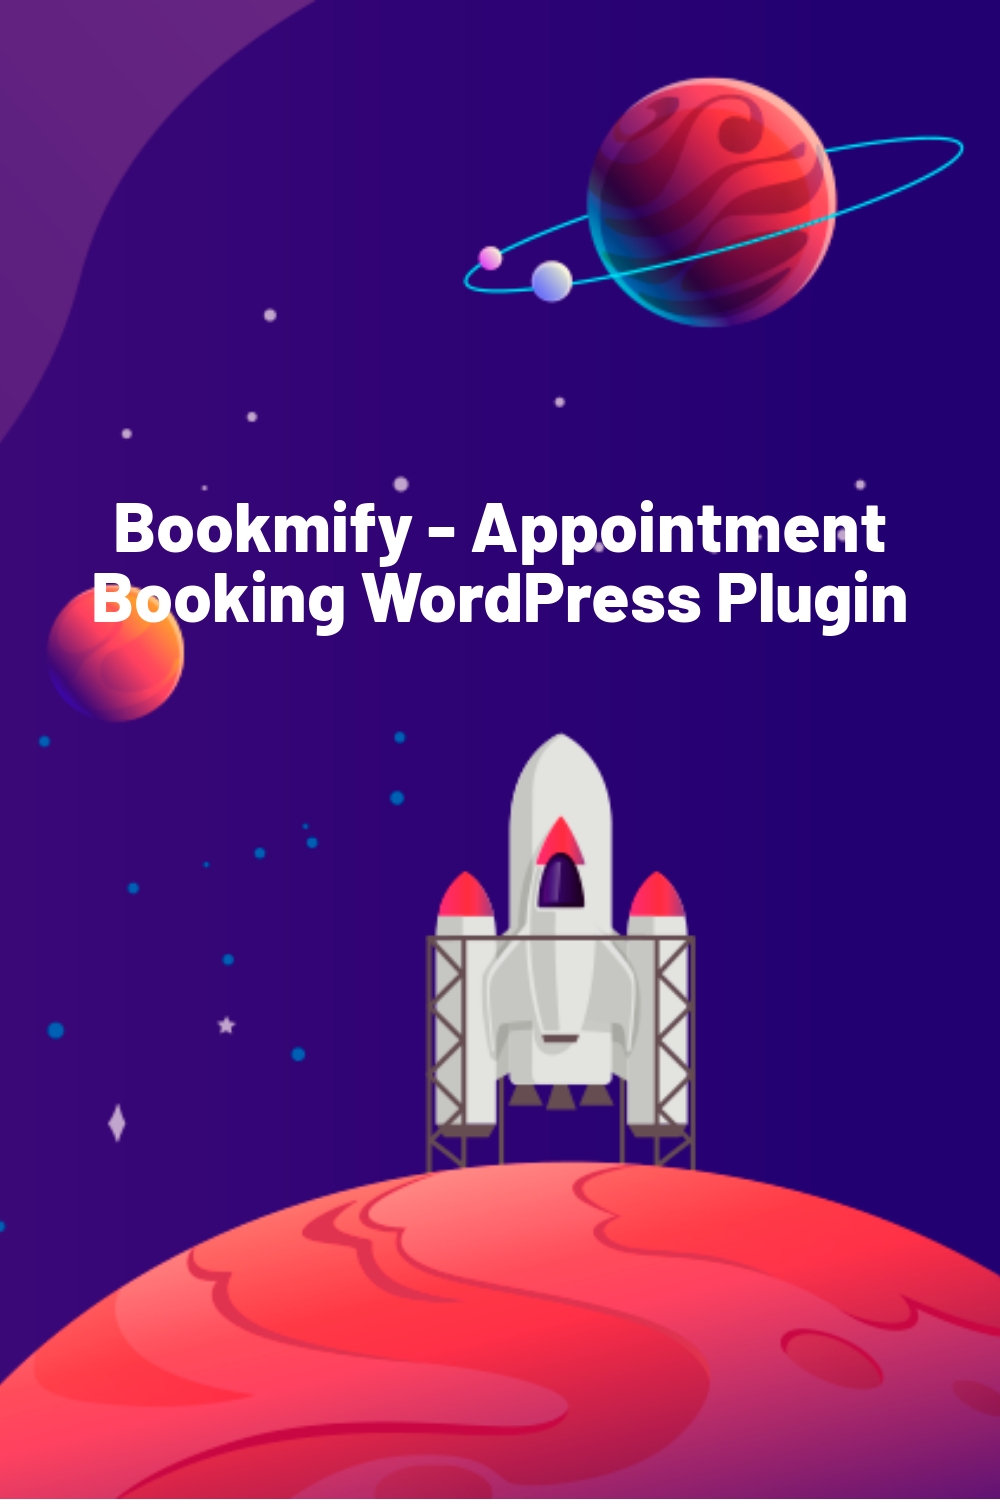 Bookmify – Appointment Booking WordPress Plugin